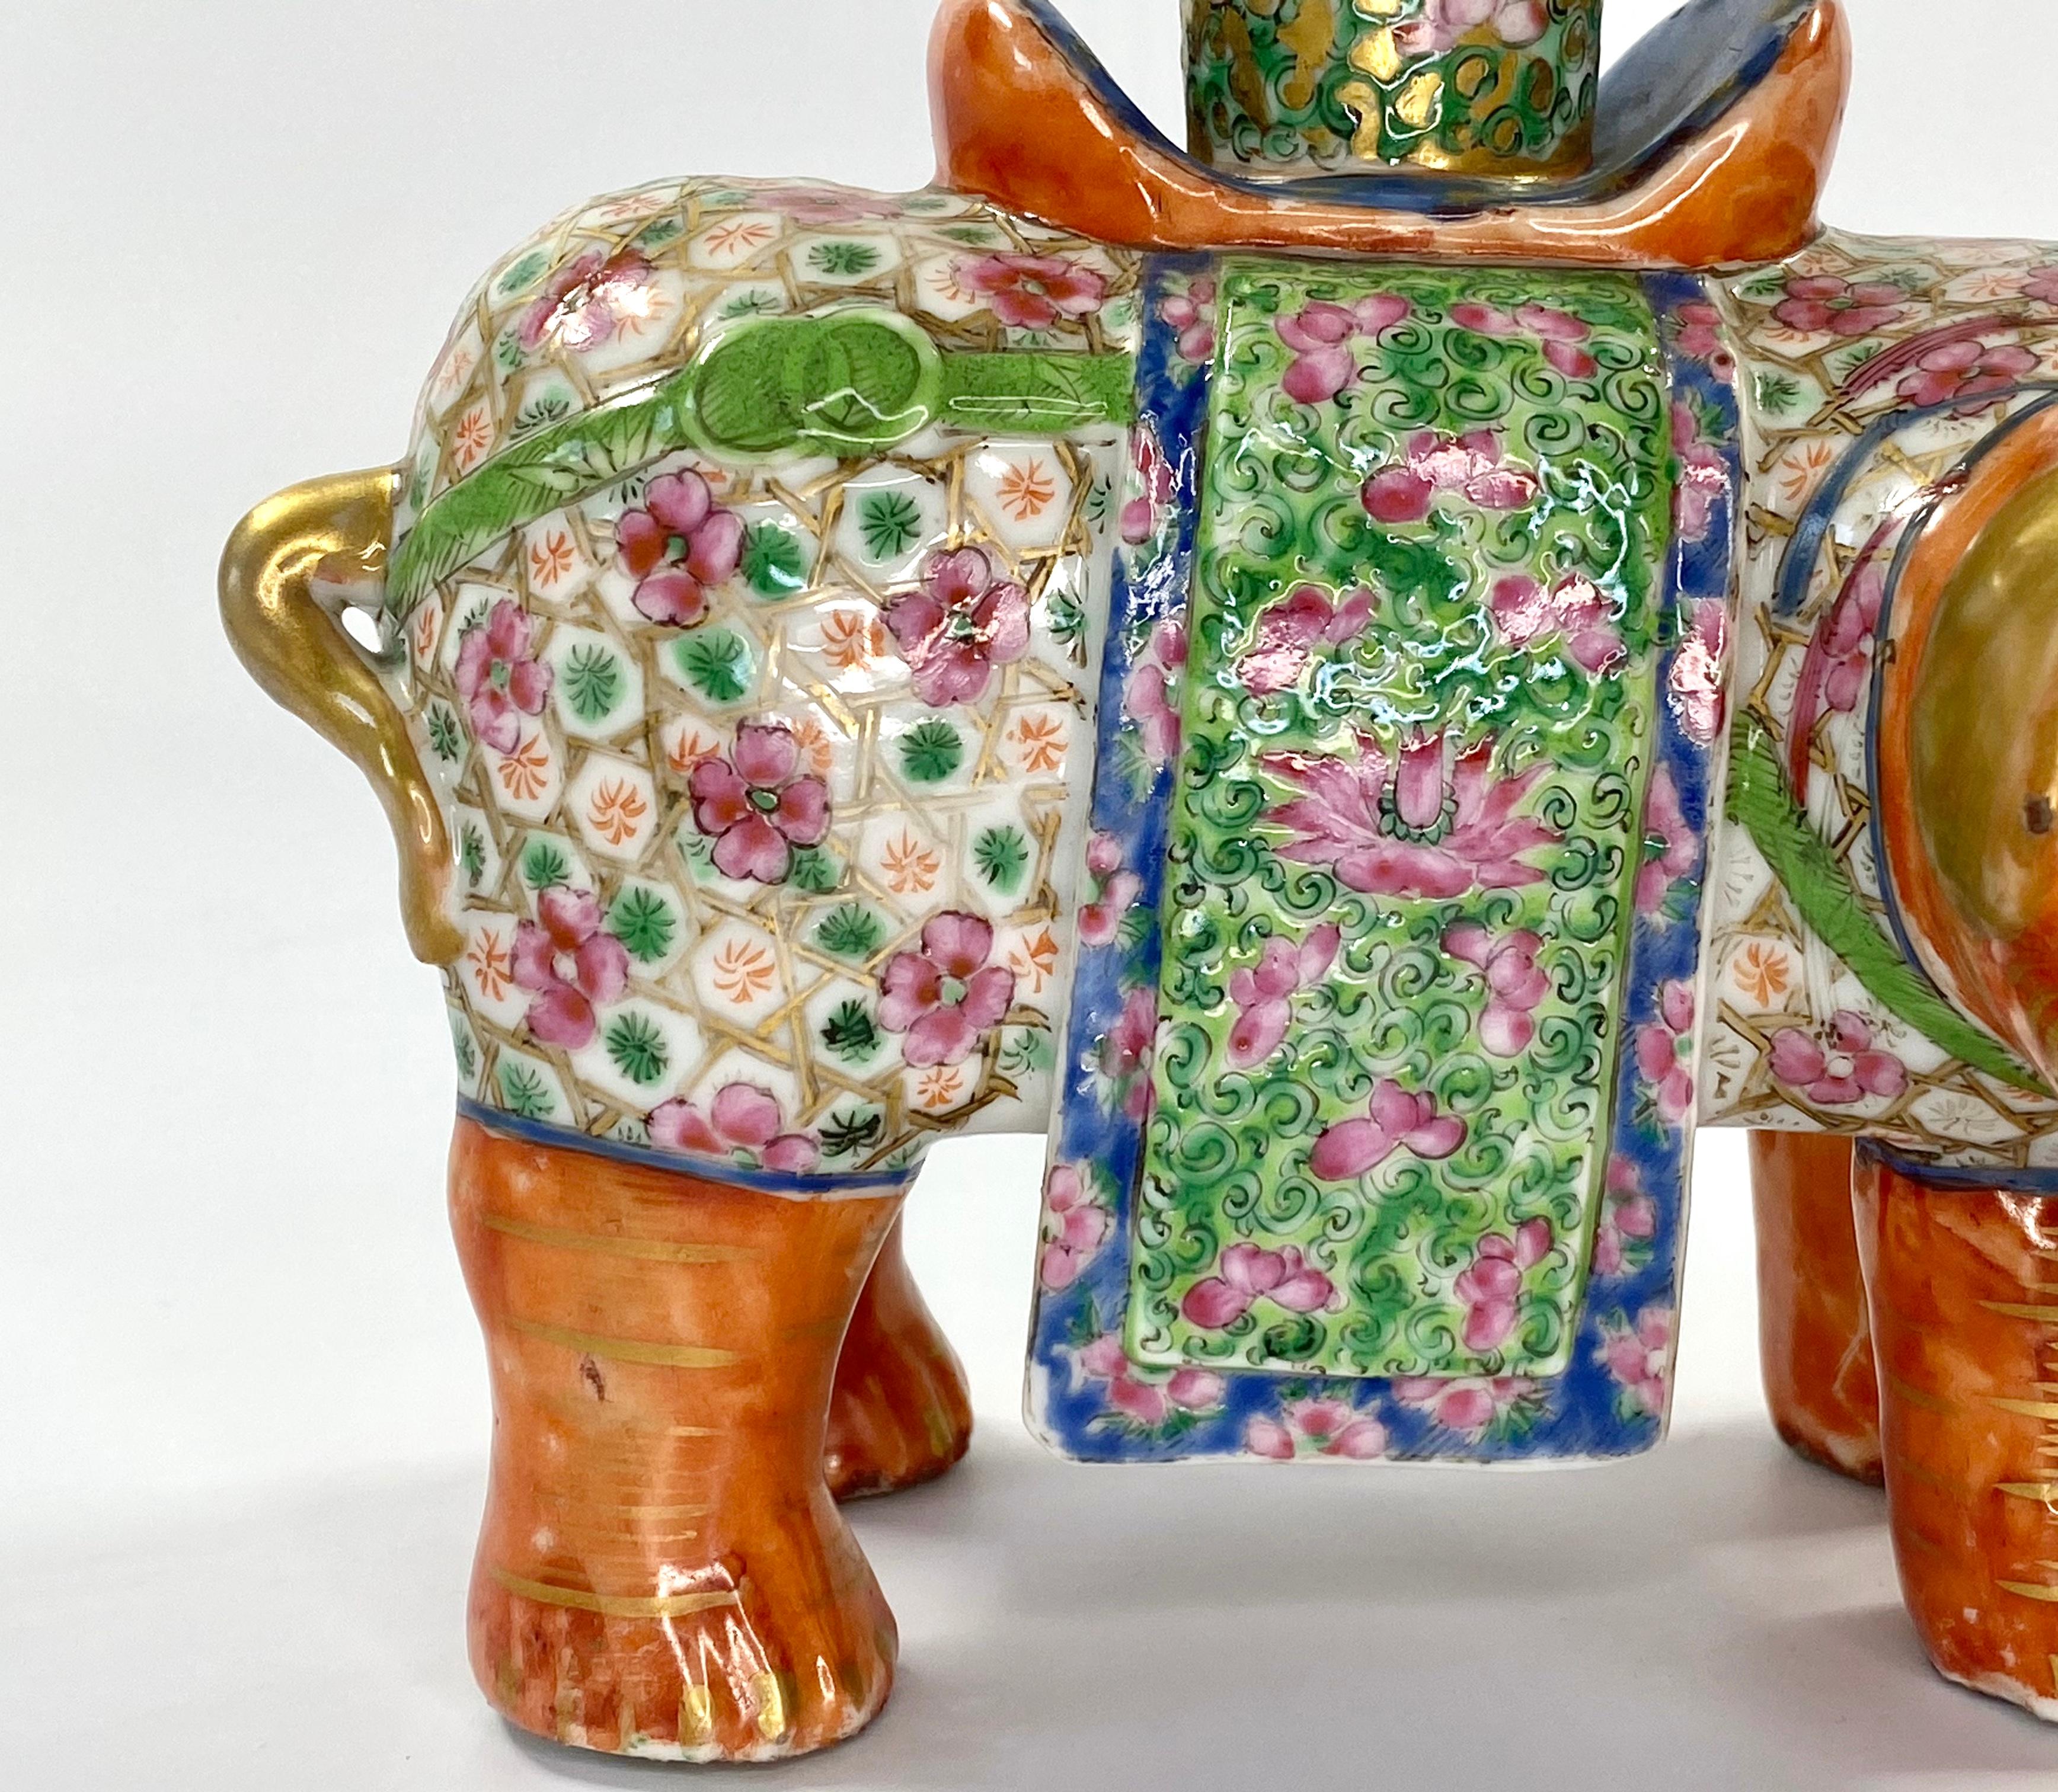 Fired Pair of Chinese Porcelain Elephant Joss Stick Holders, circa 1850, Qing Dynasty